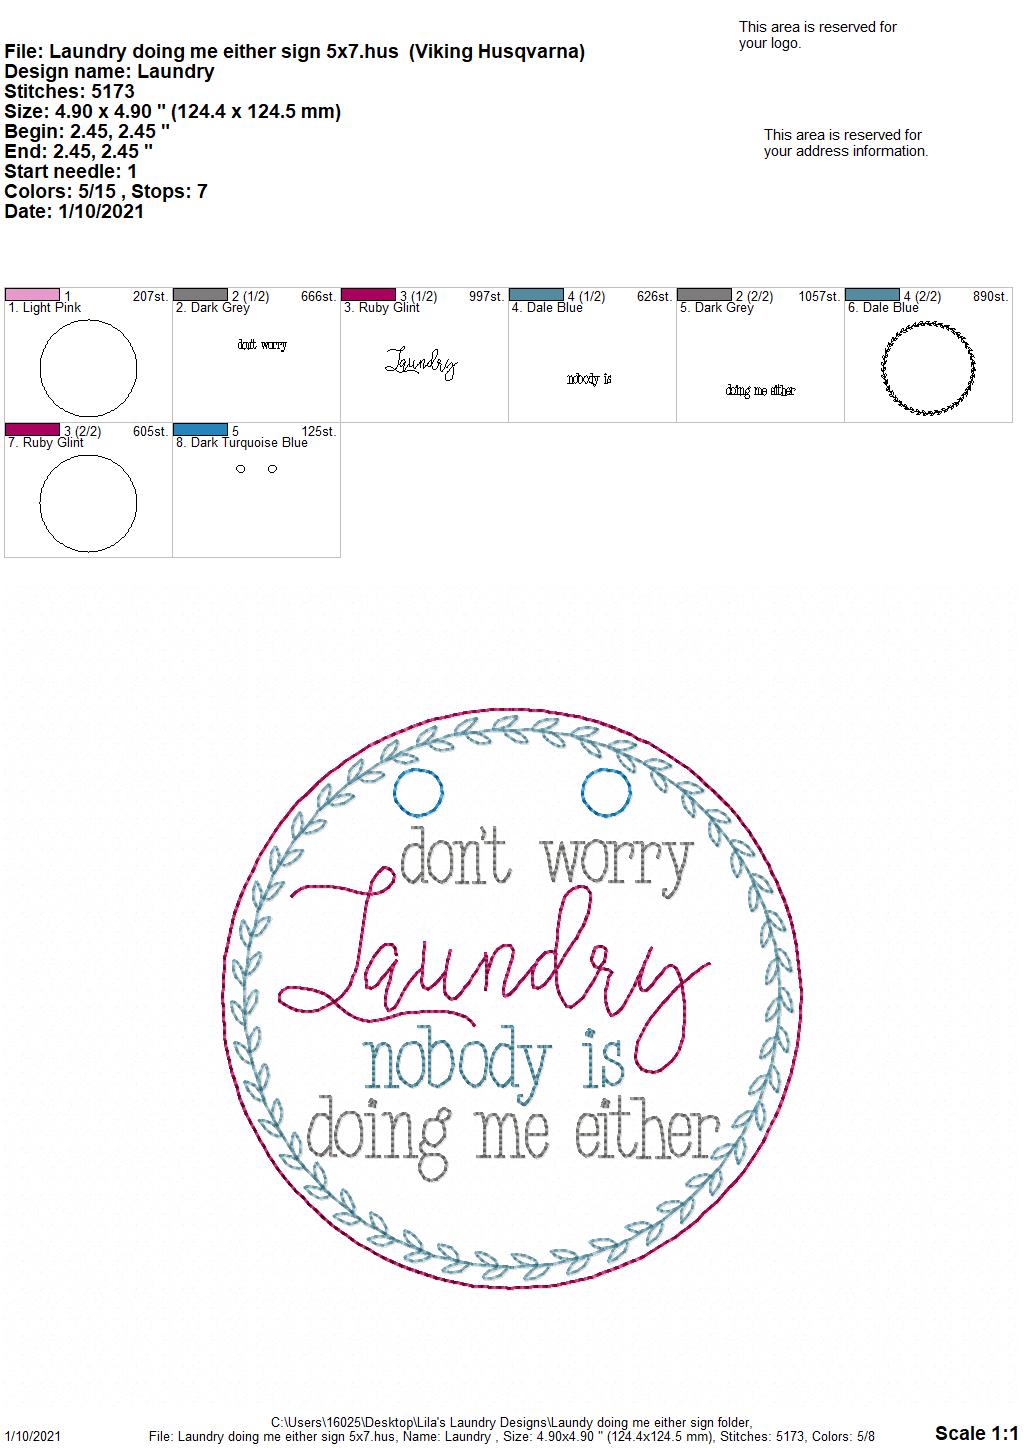 Laundry Doing Me Either Sign - 3 sizes - Digital Embroidery Design